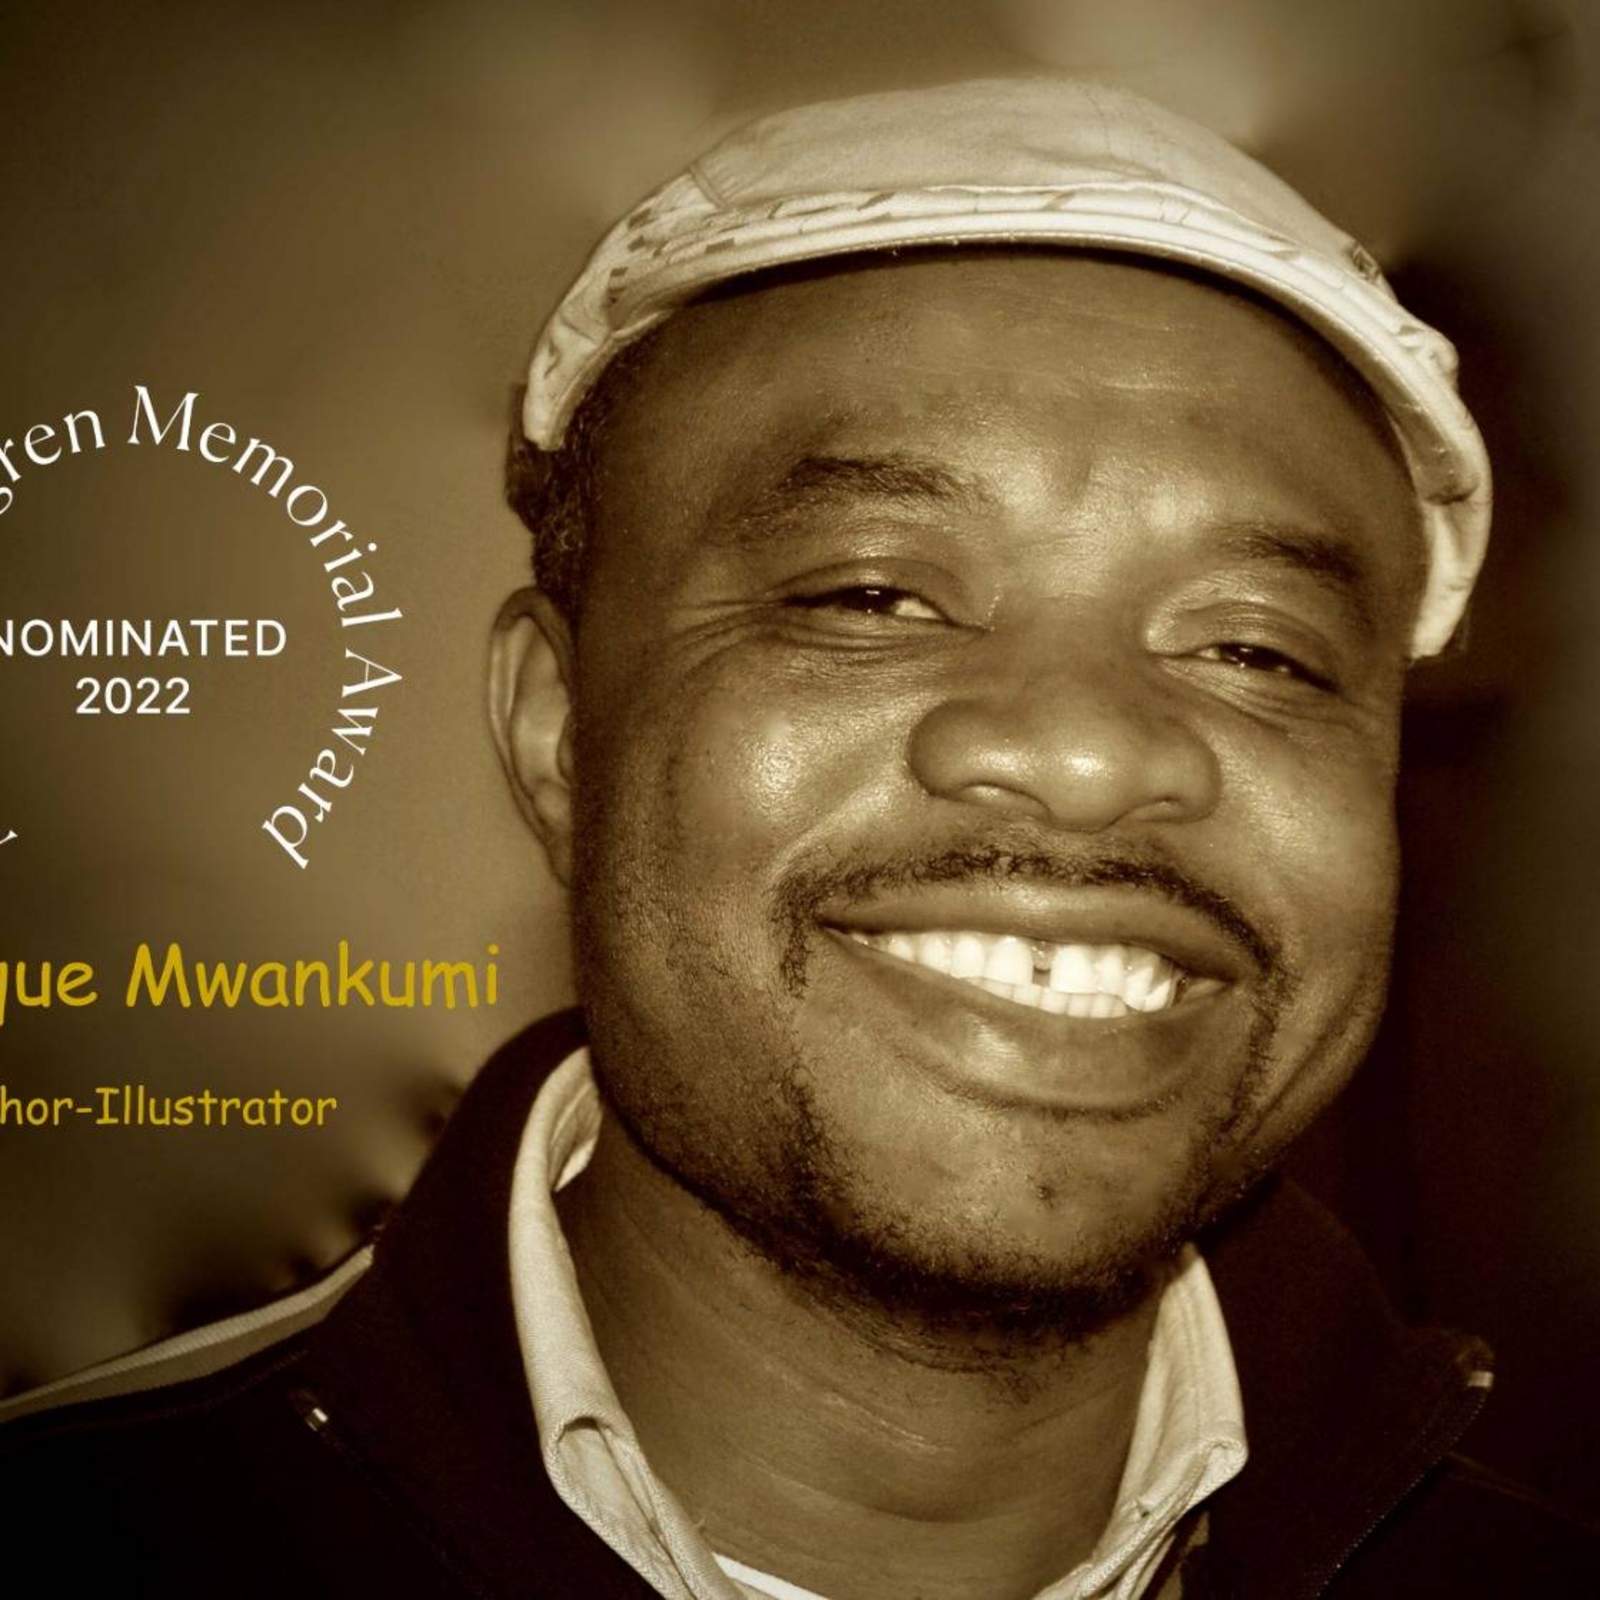 Close-up photo of smiling man with facial hair wearing a cap. Text: Dominique Mwankumi, Author-Illustrator, Astrid Lindgren Memorial Award Nominated 2022